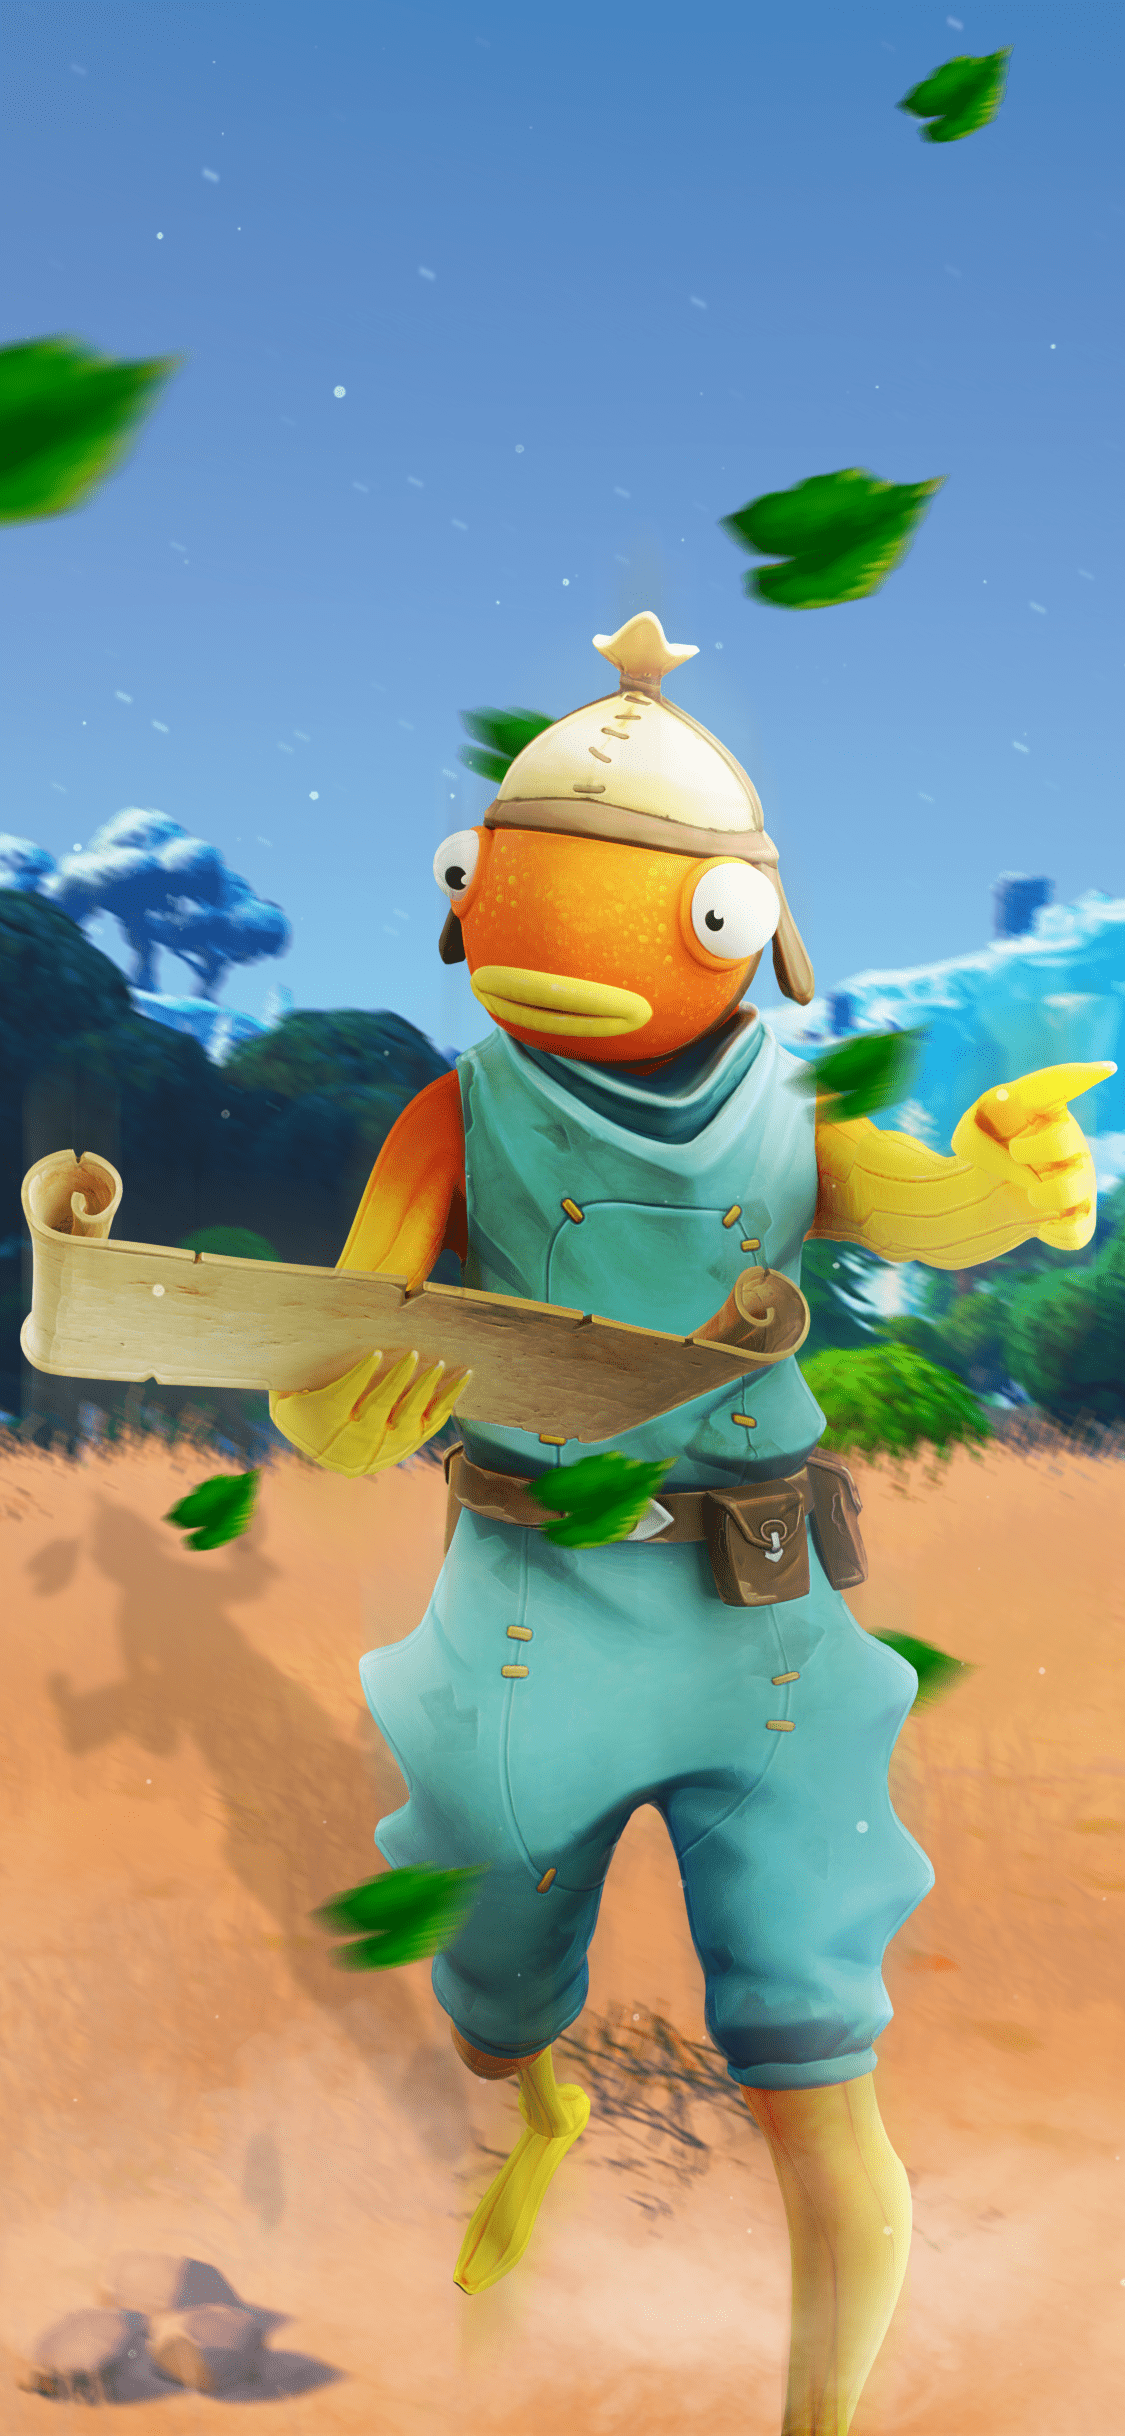 Featured image of post Fishstick Fortnite Wallpaper : Explore fishstick fortnite wallpapers on wallpapersafari | find more items about fishstick fortnite wallpapers, fortnite wallpapers, fortnite wallpaper.